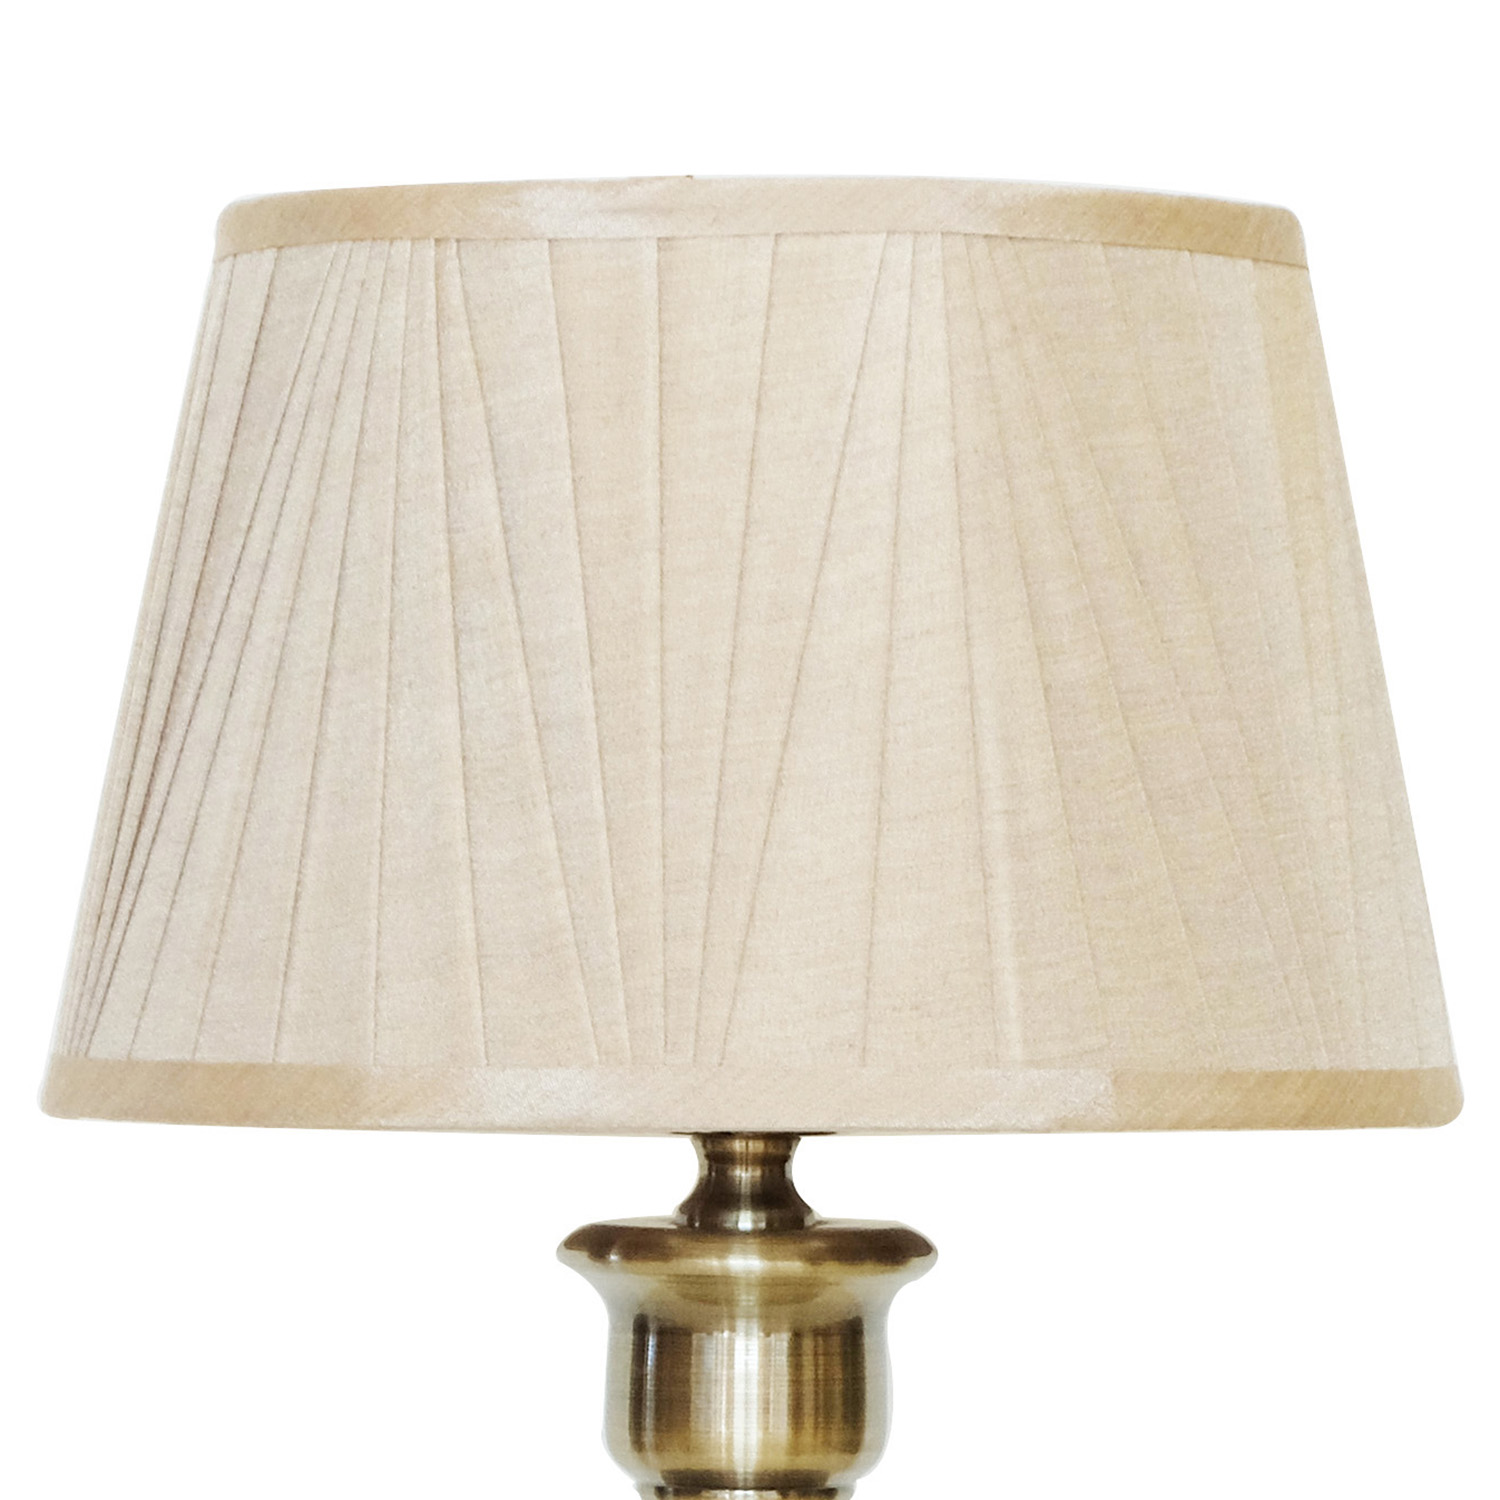 Antique Brass Trophy Table Lamp - Home Store + More